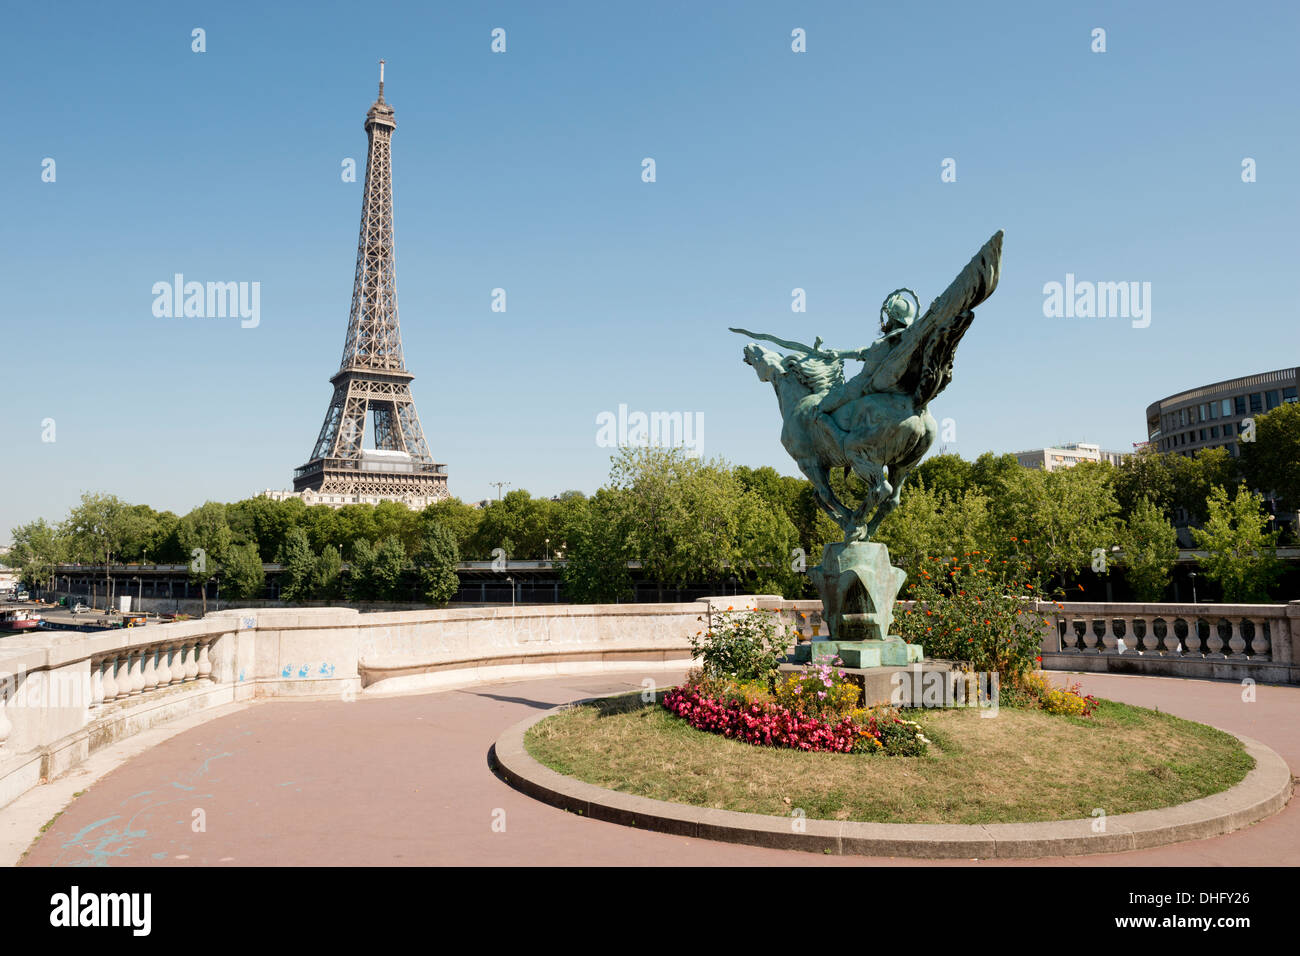 A statue of a Horsewoman on the Bir-Hakeim viaduct with the Eiffel Tower in the distance. Paris, France, Europe. Stock Photo